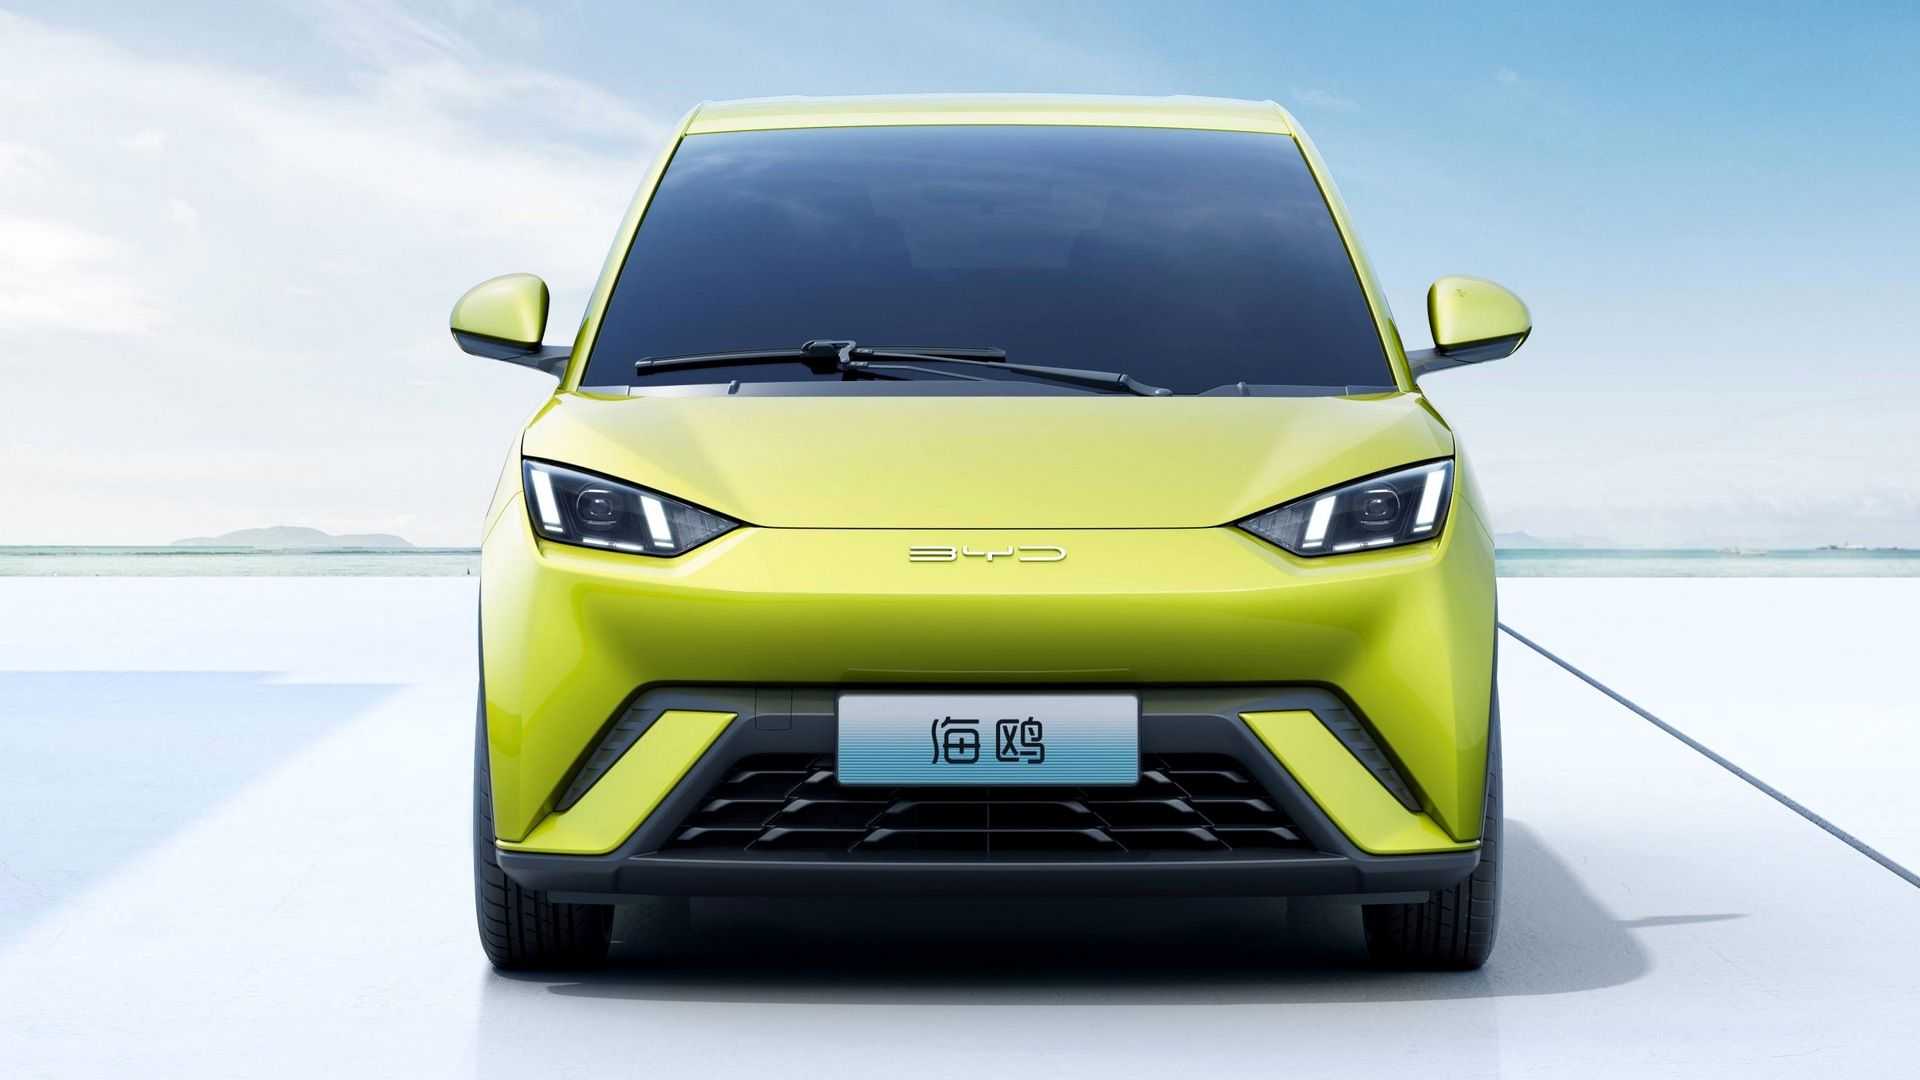 byd seagull ev priced from $11,400, gets 10,000 orders on first day